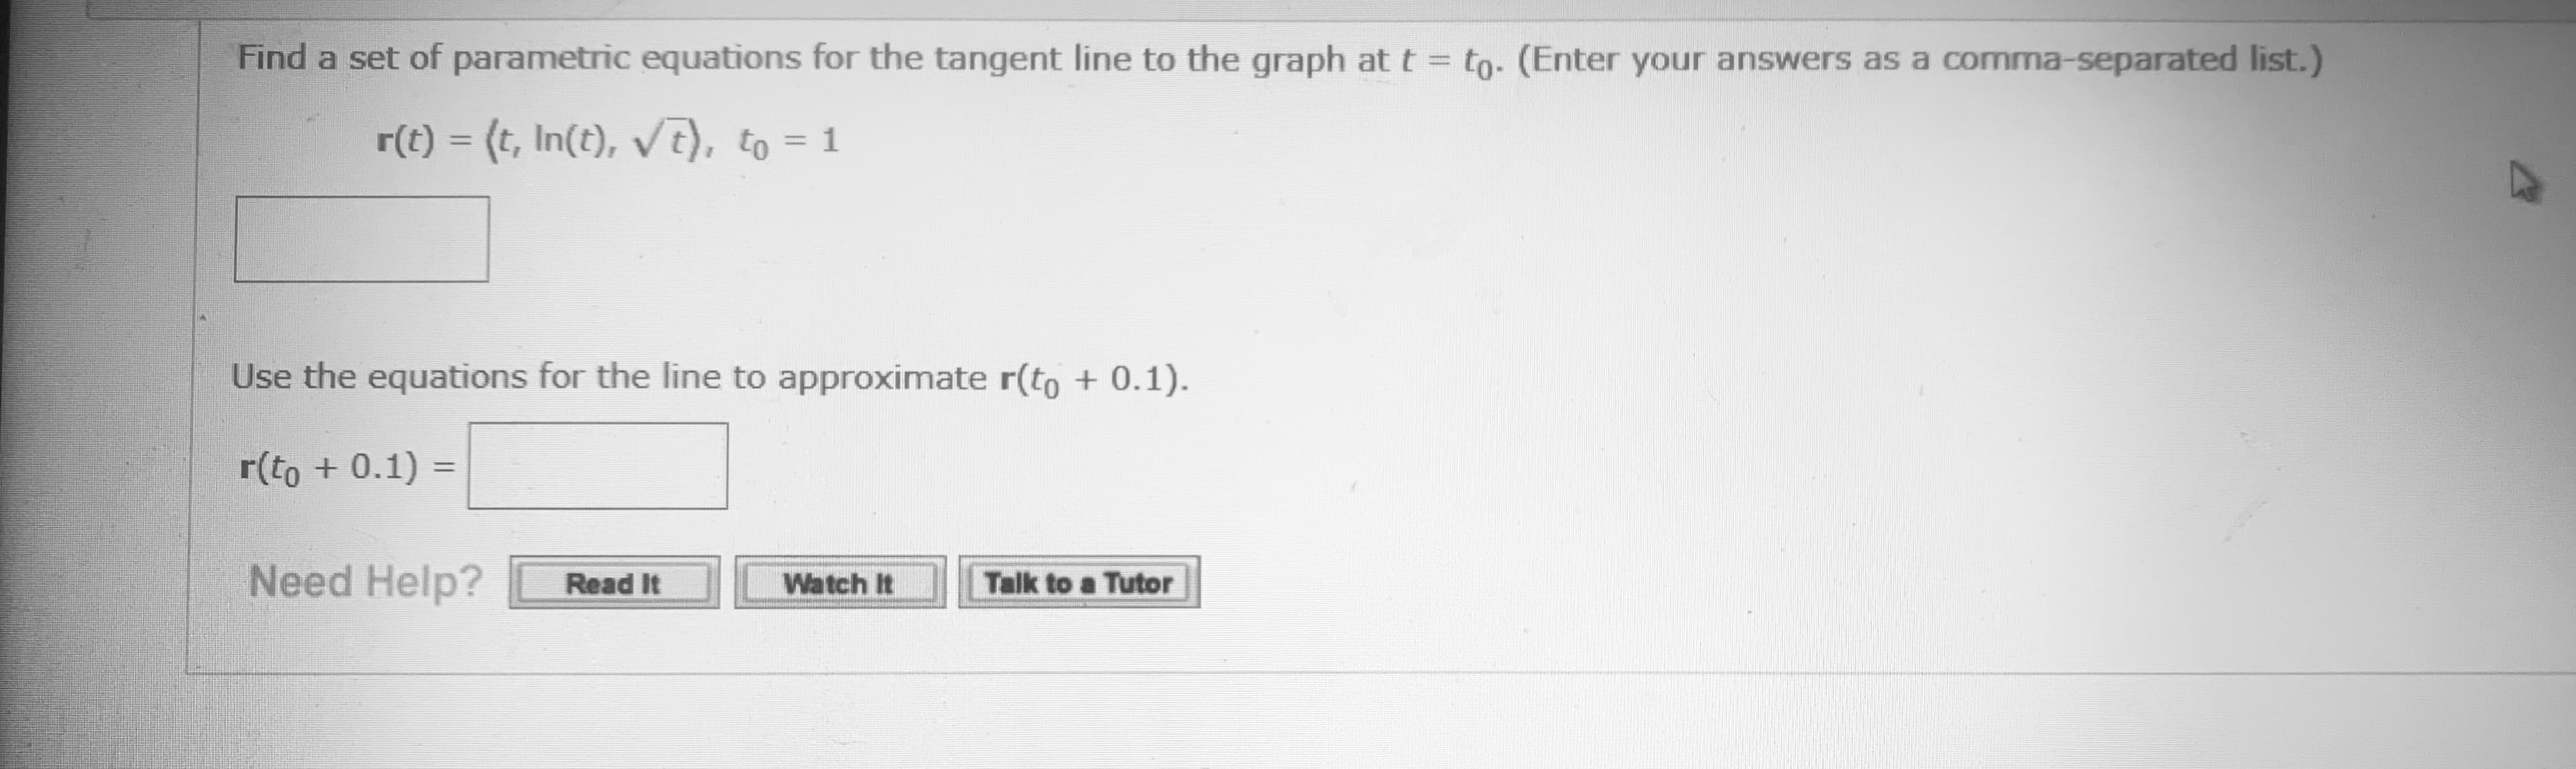 Find a set of parametric equations for the tangent line to the graph at t = to- (Enter your answers as a comma-separated list.)
r(t) = (t, In(t), V7), to = 1
%3D
Use the equations for the line to approximate r(to + 0.1).
r(to + 0.1) =
%3D
